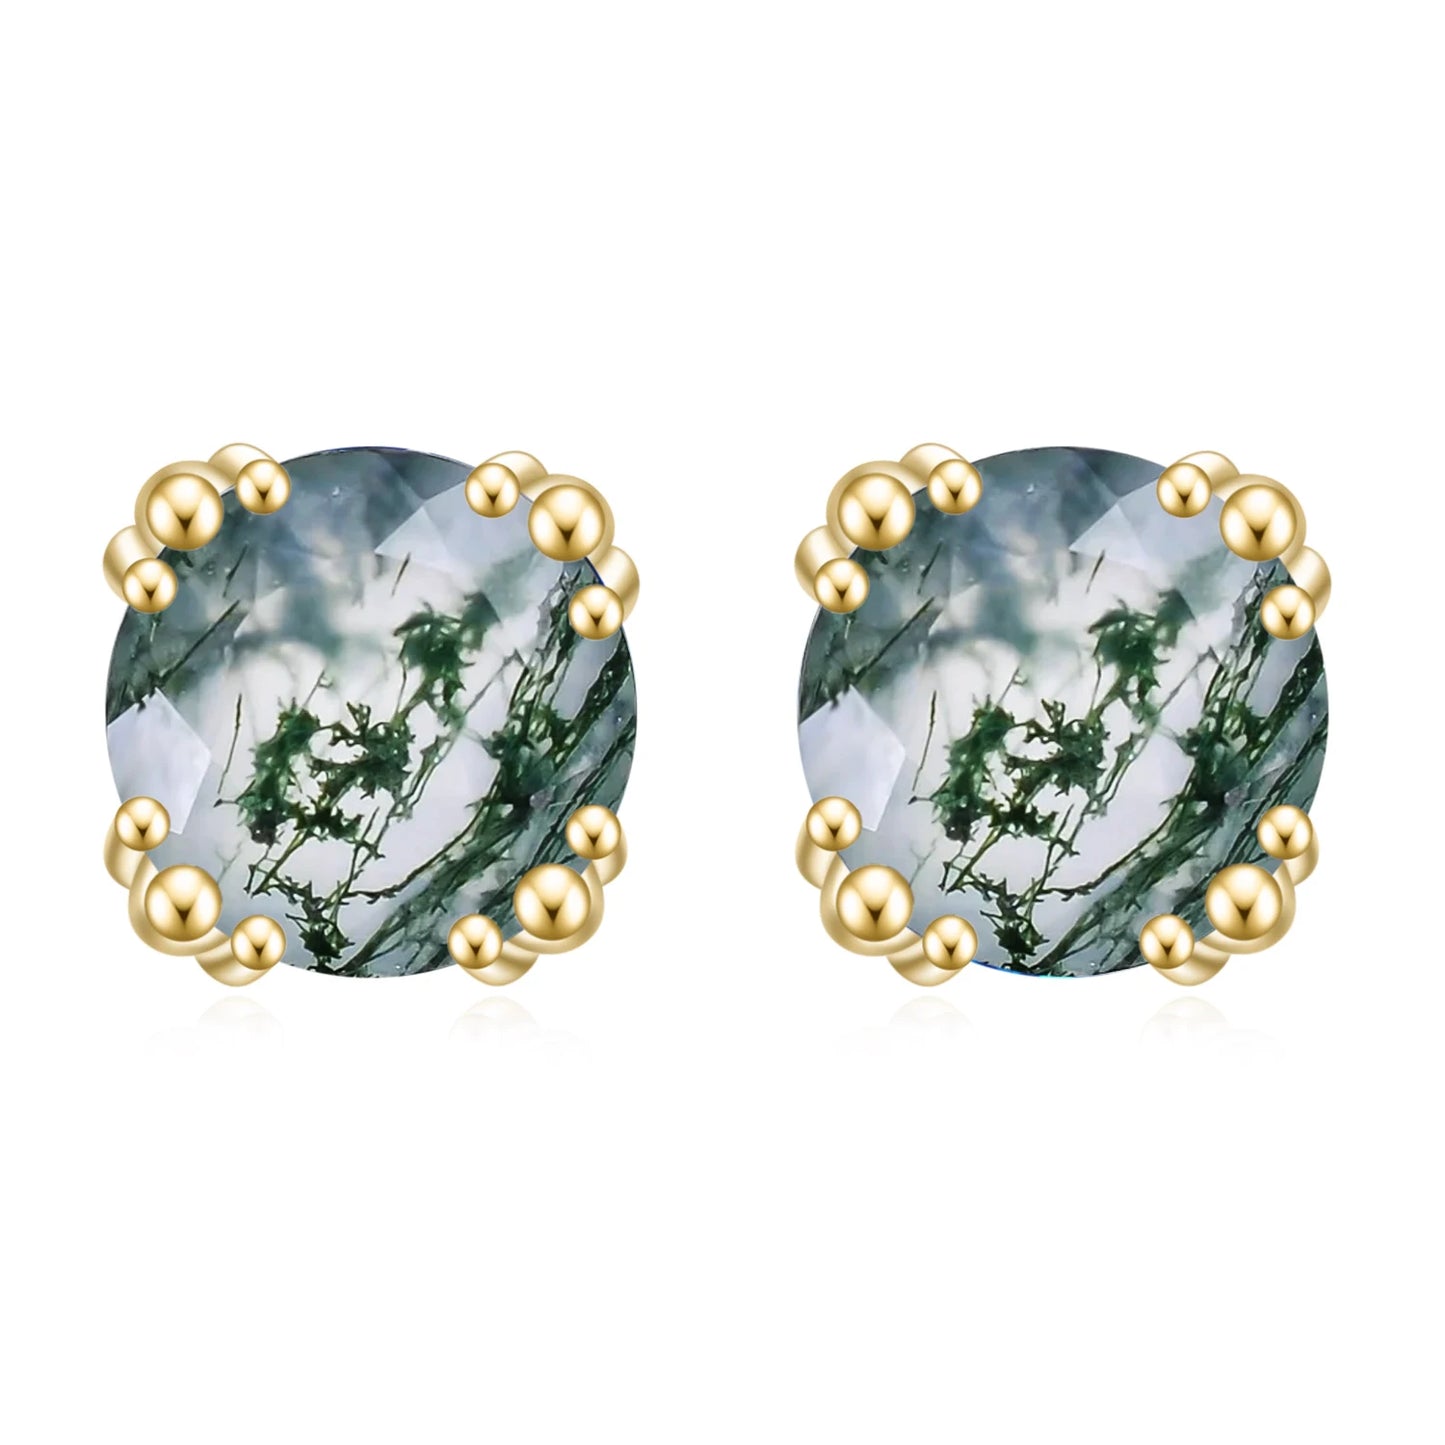 GEM'S BALLET Unique 1.0Ct 6mm Round Cut Moss Agate Claw Prongs Studs Earrings in 925 Sterling Silver Women's Wedding Earrings Moss Agate-G 925 Sterling Silver CHINA